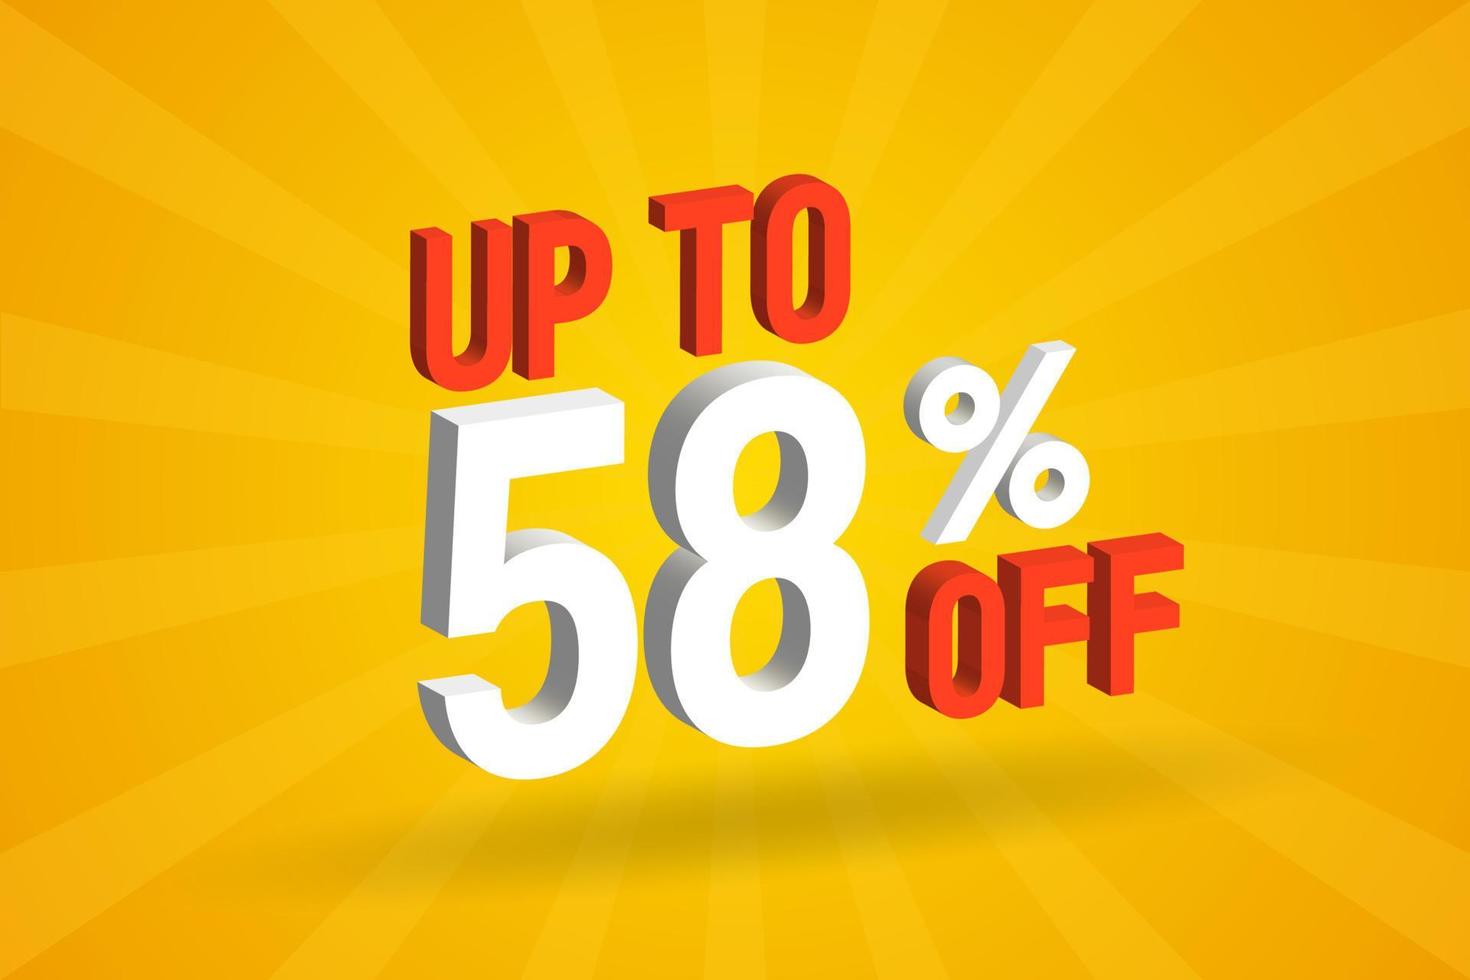 Up To 58 Percent off 3D Special promotional campaign design. Upto 58 of 3D Discount Offer for Sale and marketing. vector